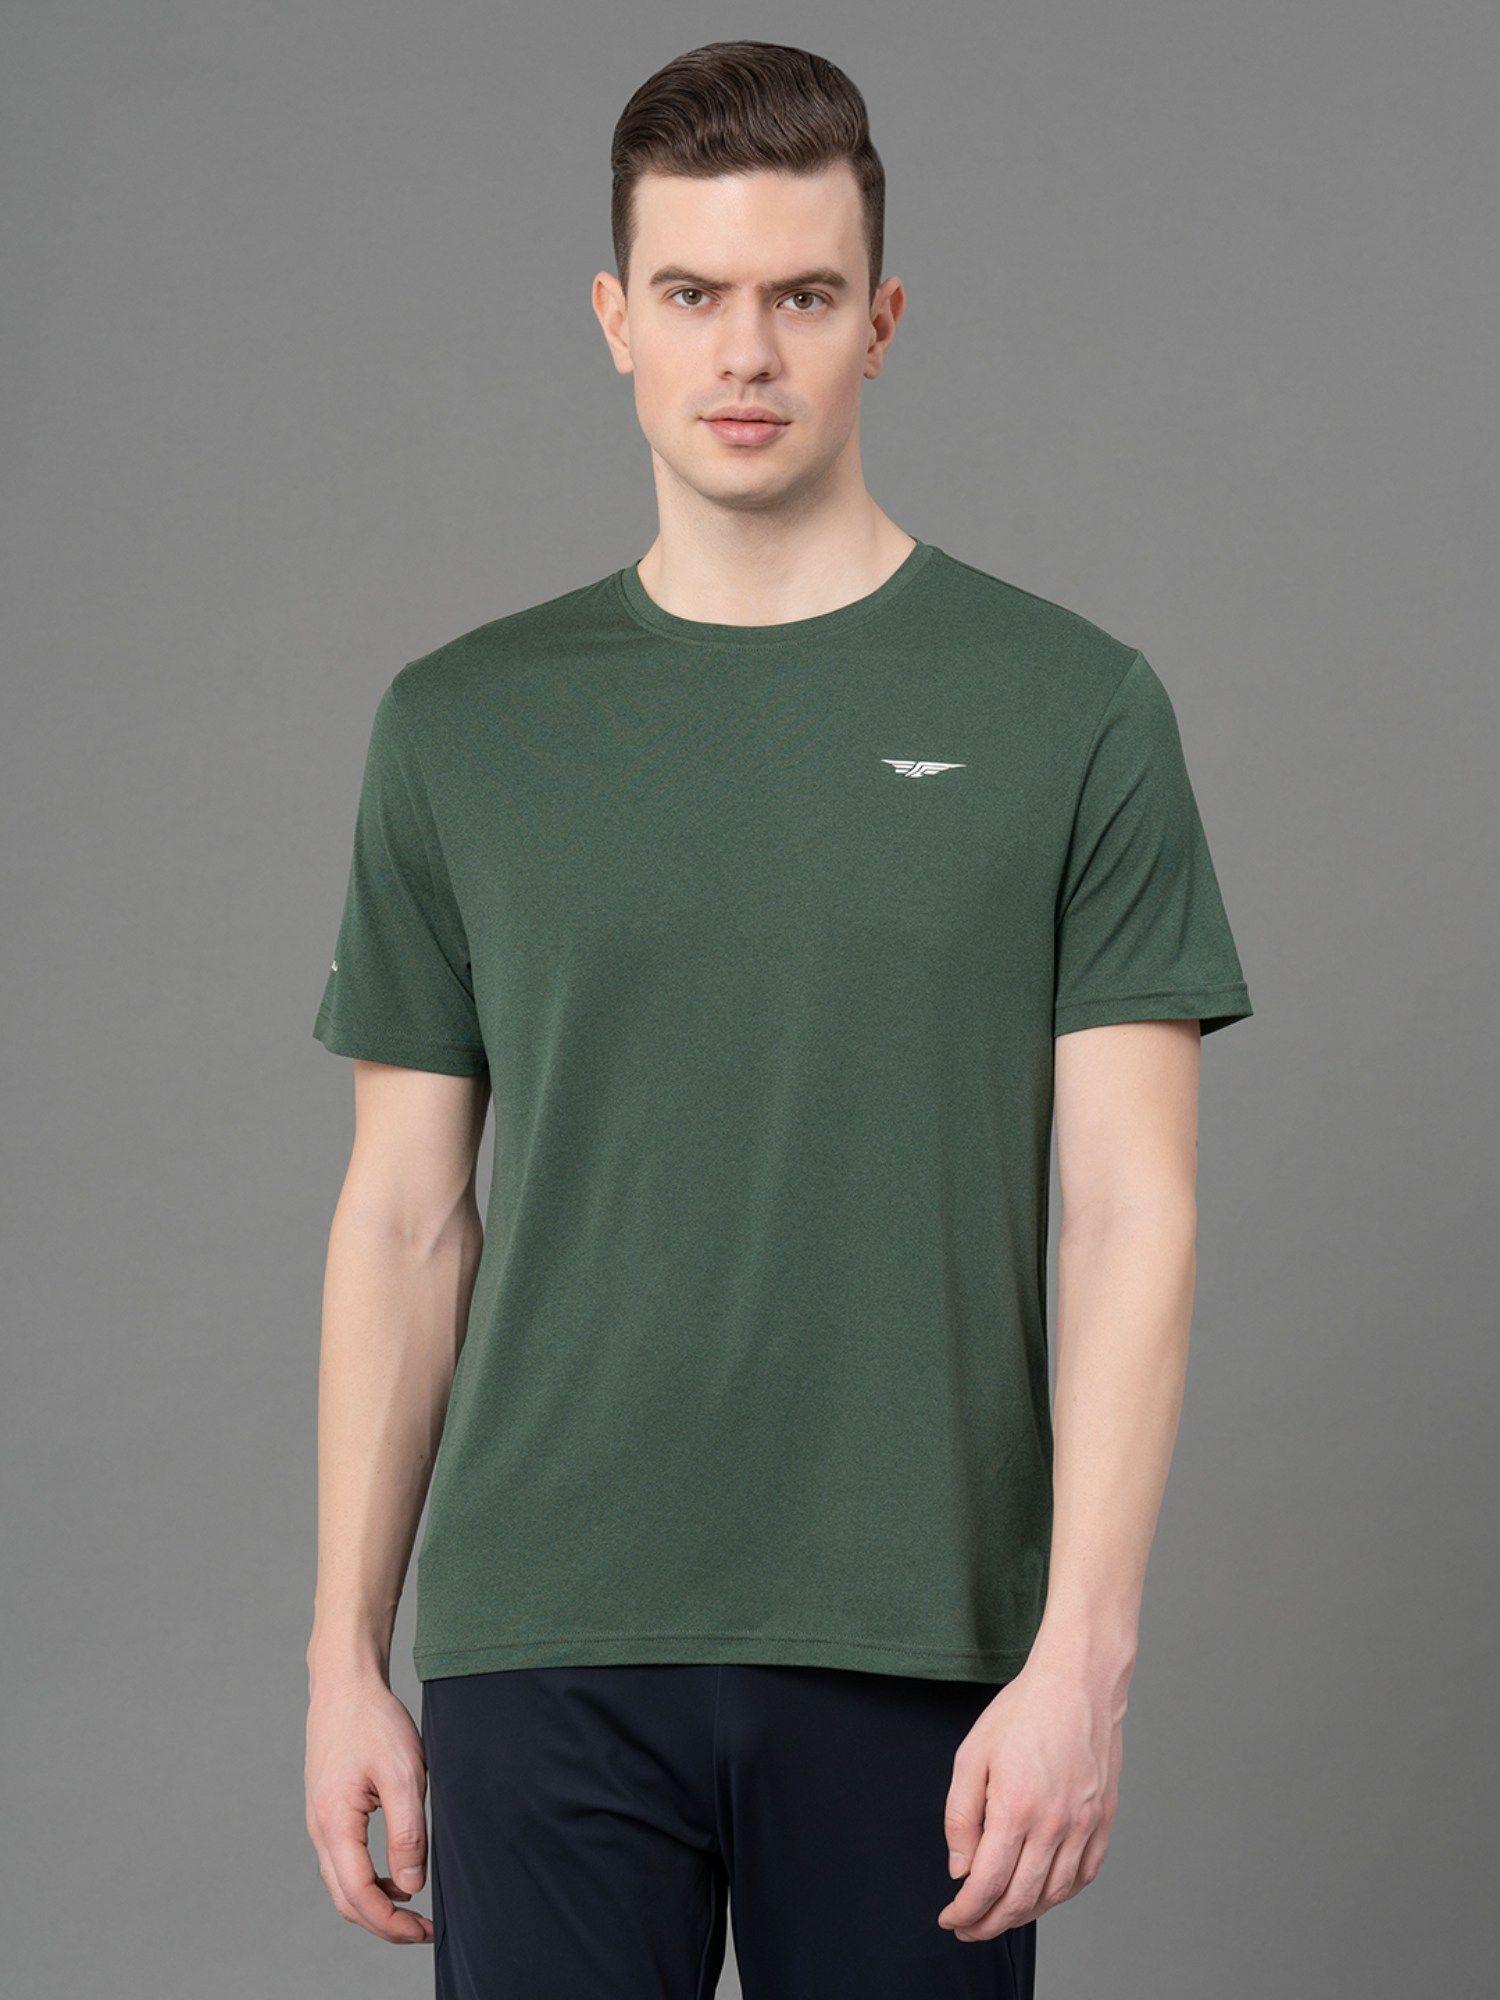 men's army green solid polyester spandex activewear t-shirt